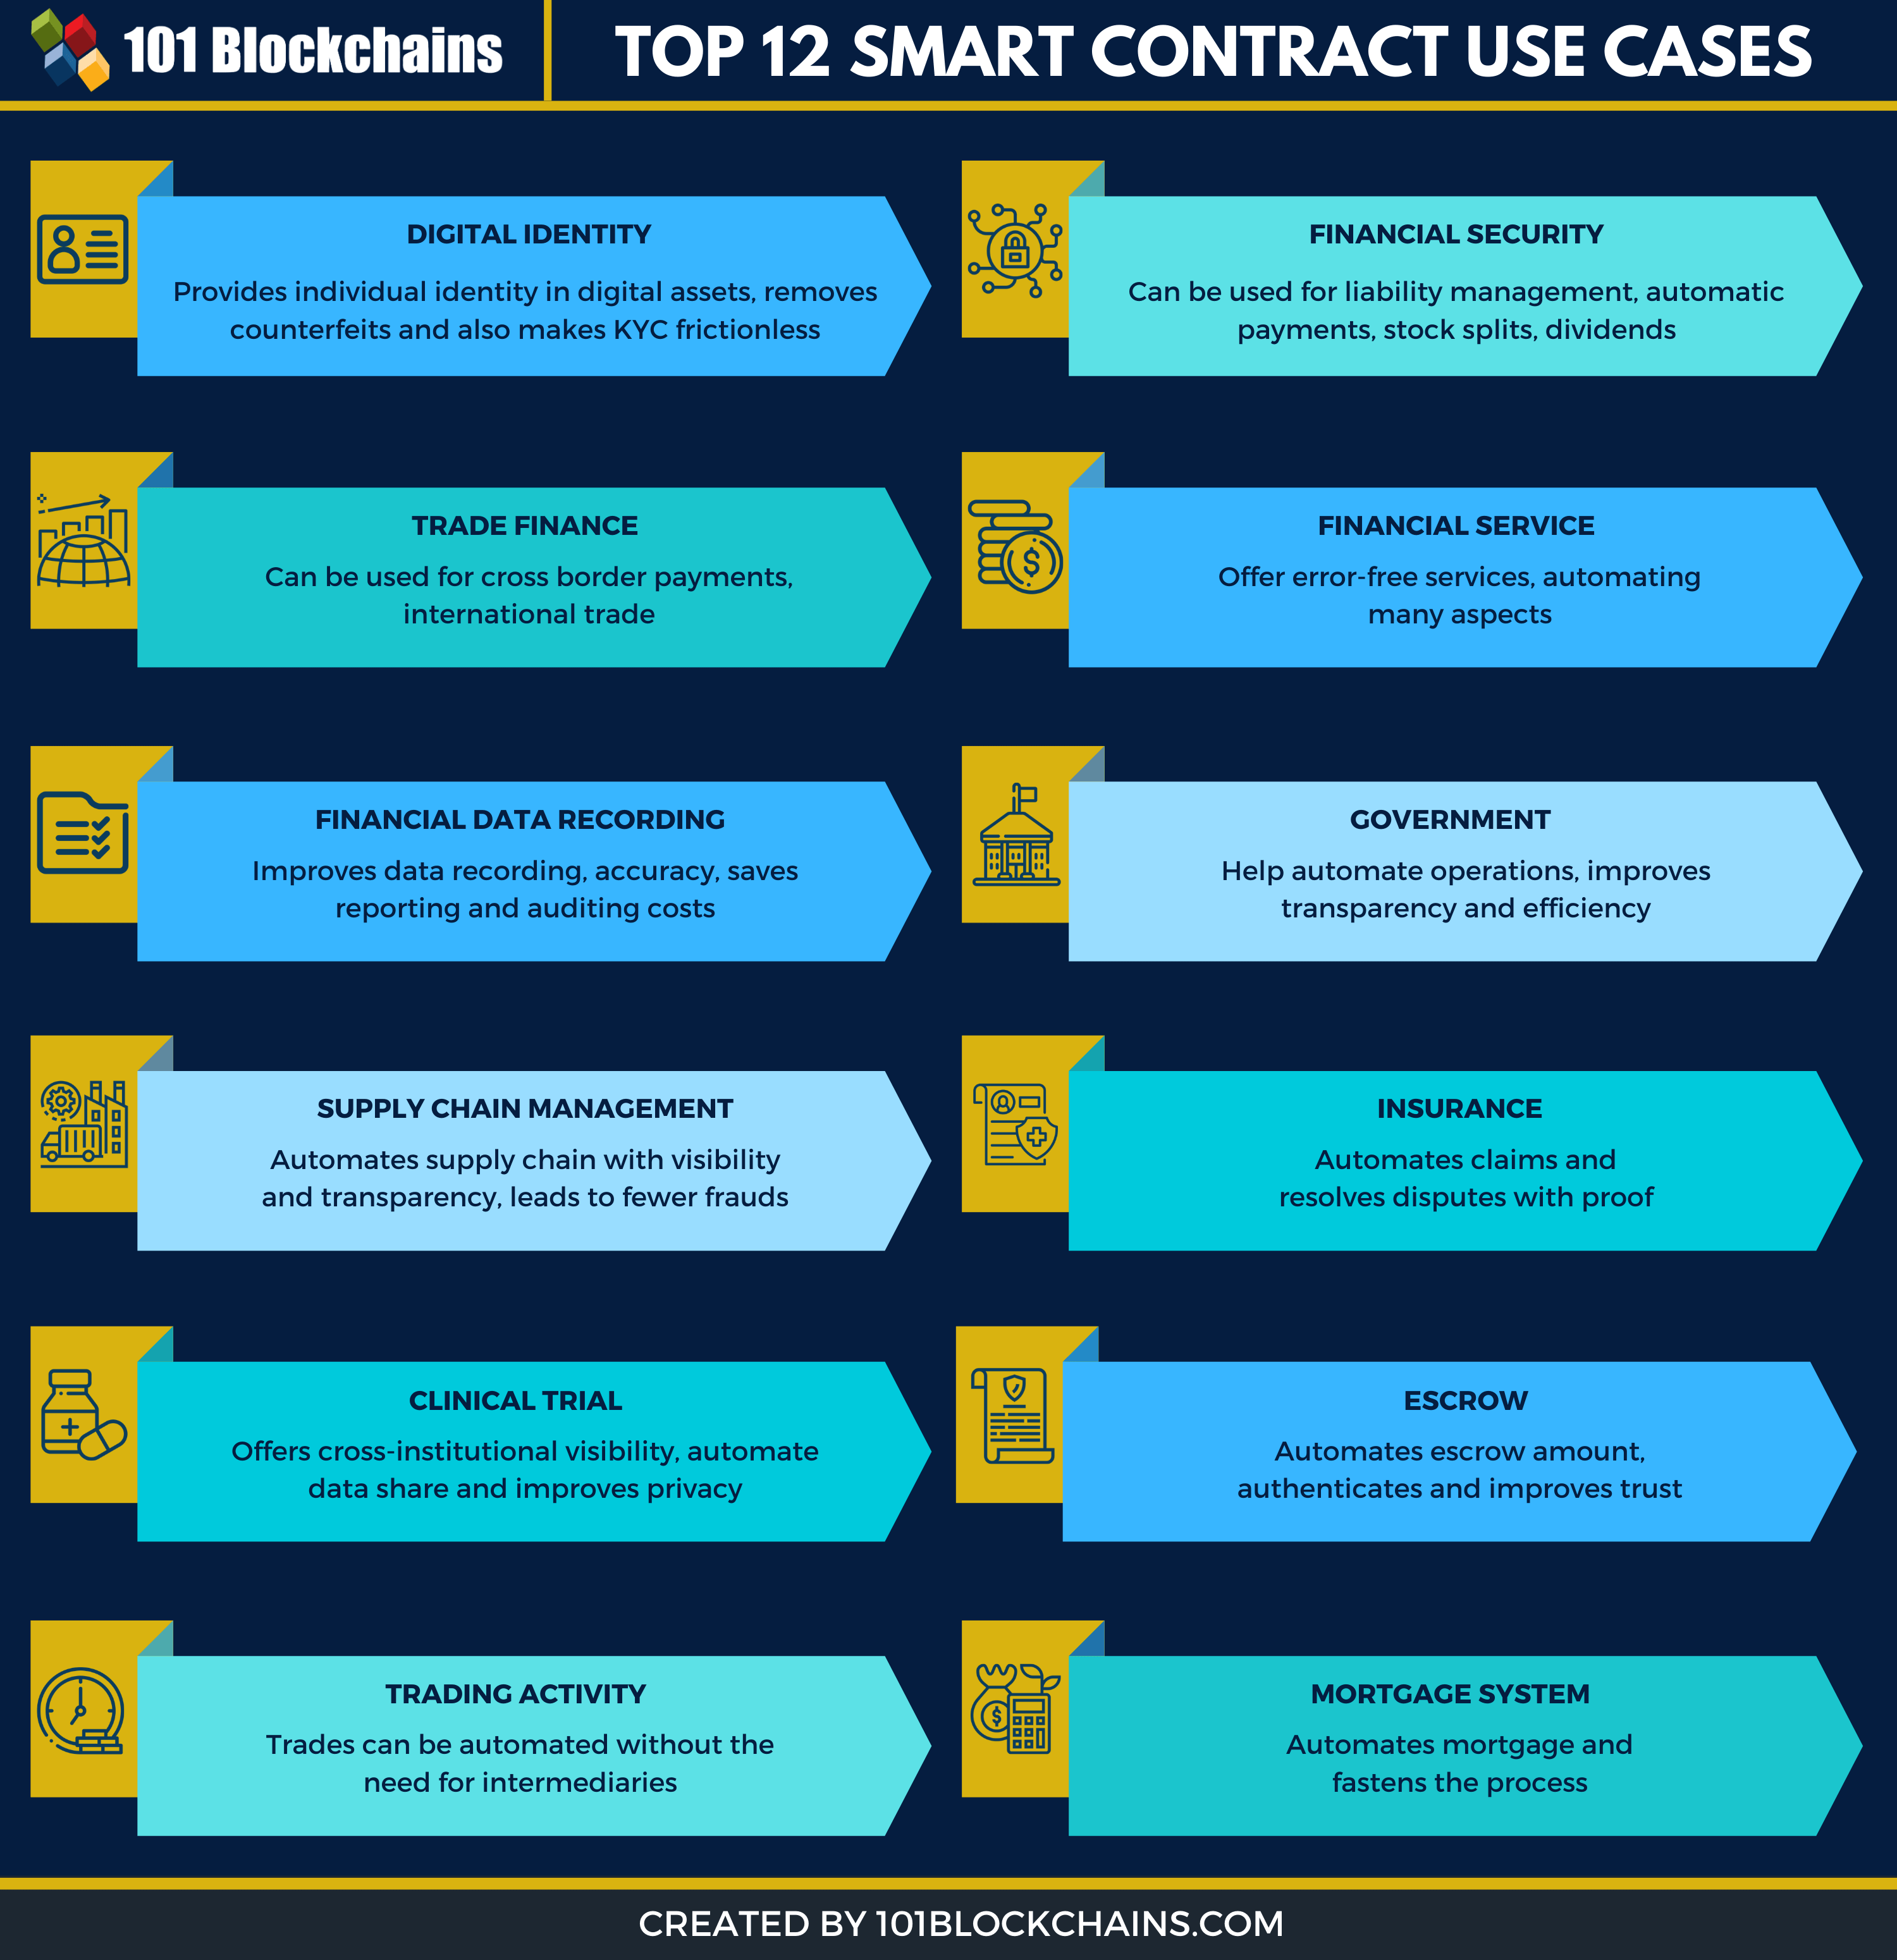 smart contract use cases